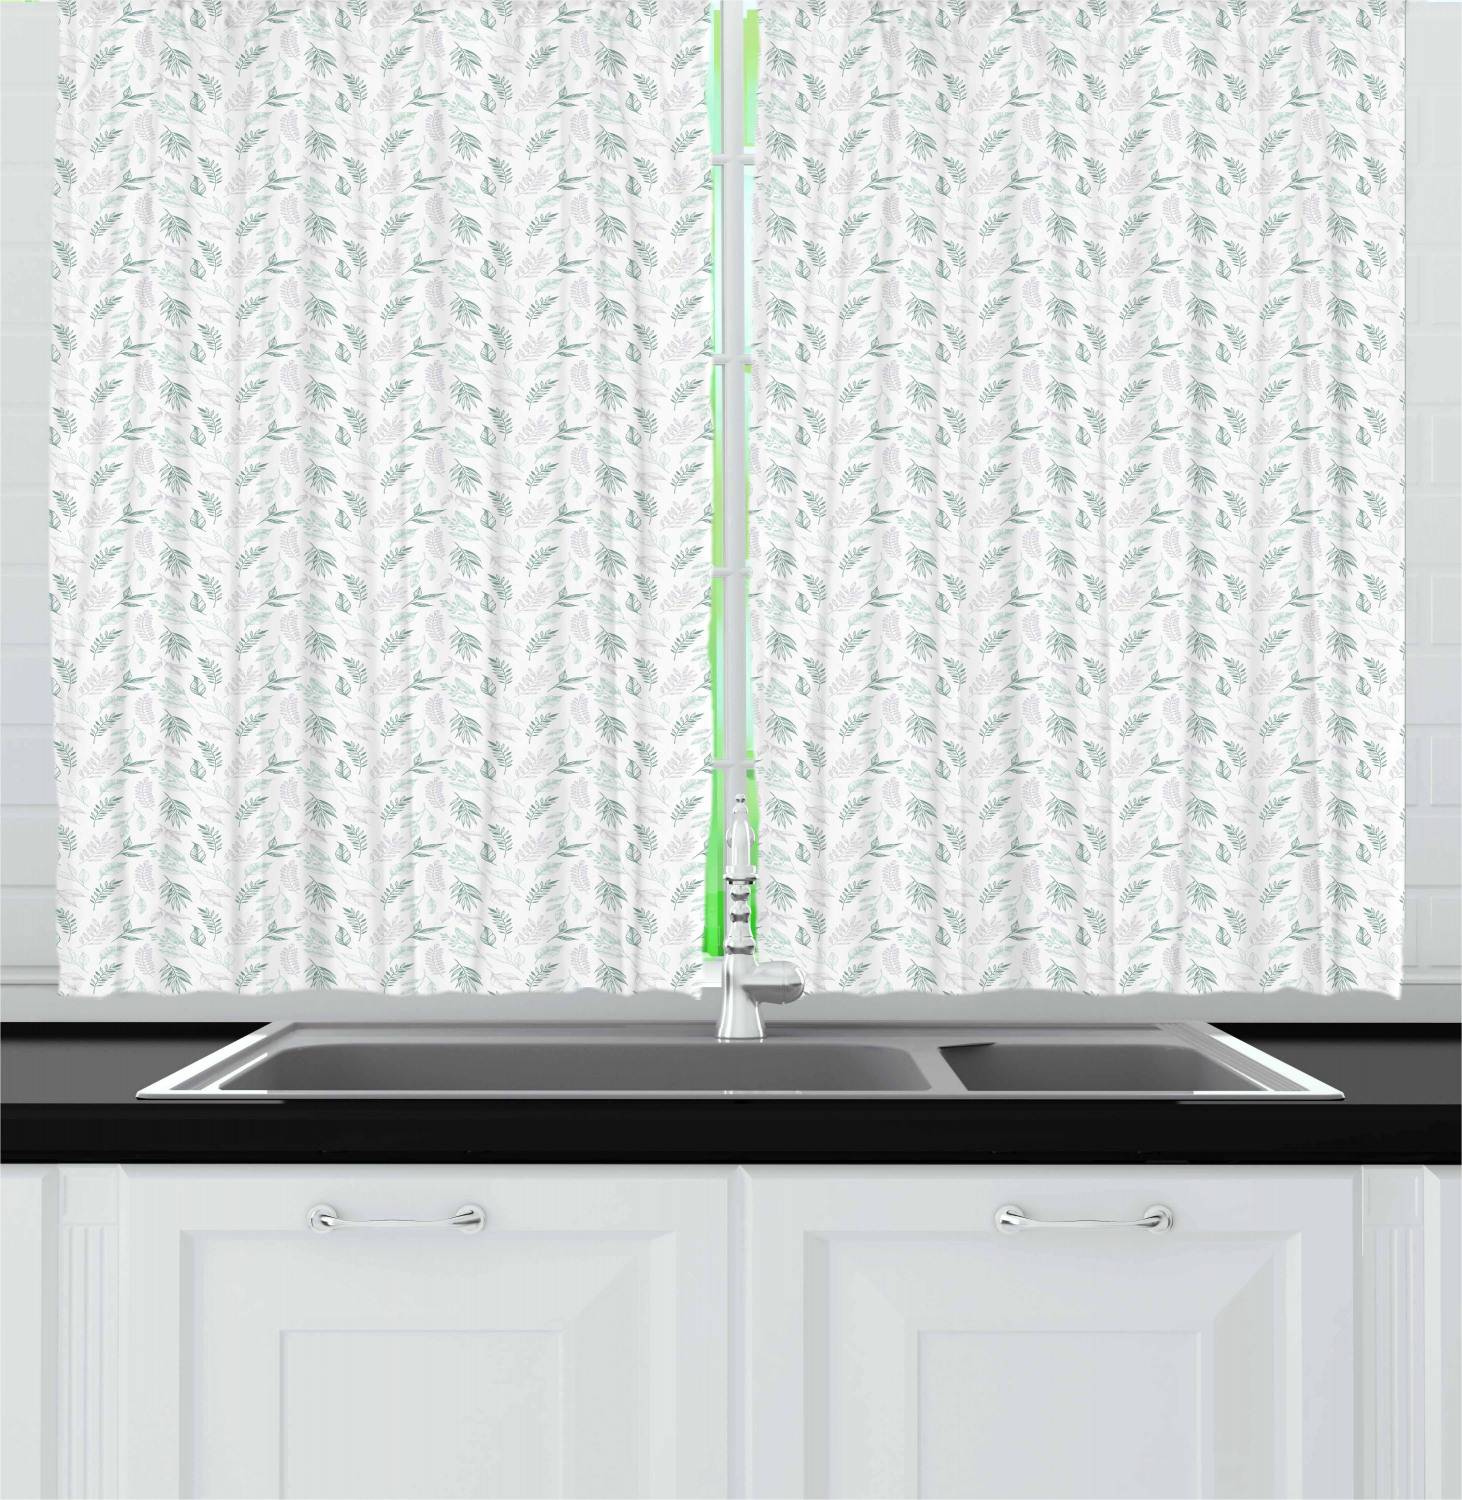 Spring Kitchen Curtains 2 Panel Set Window Drapes 55" X 39" by Ambesonne 